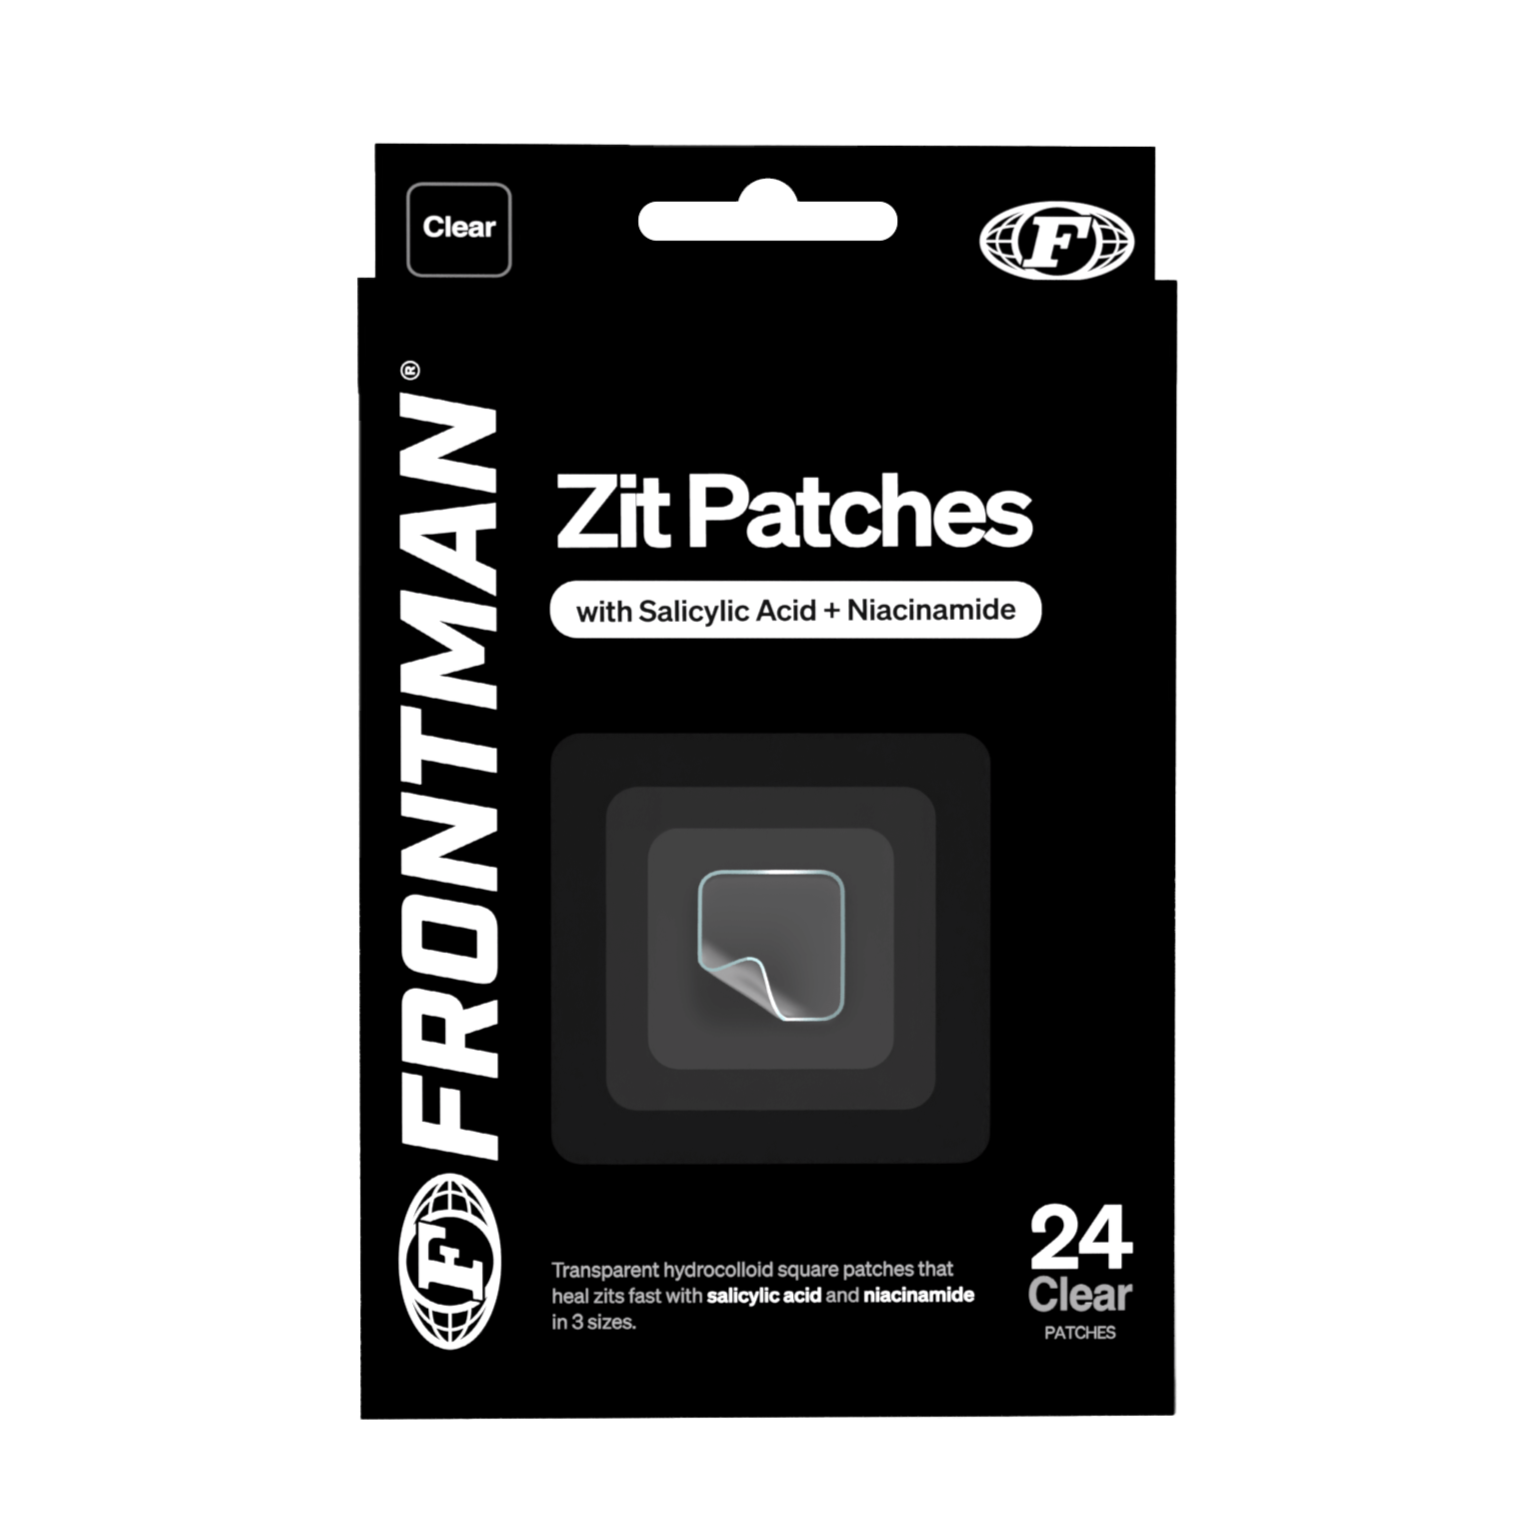 Zit Patches image